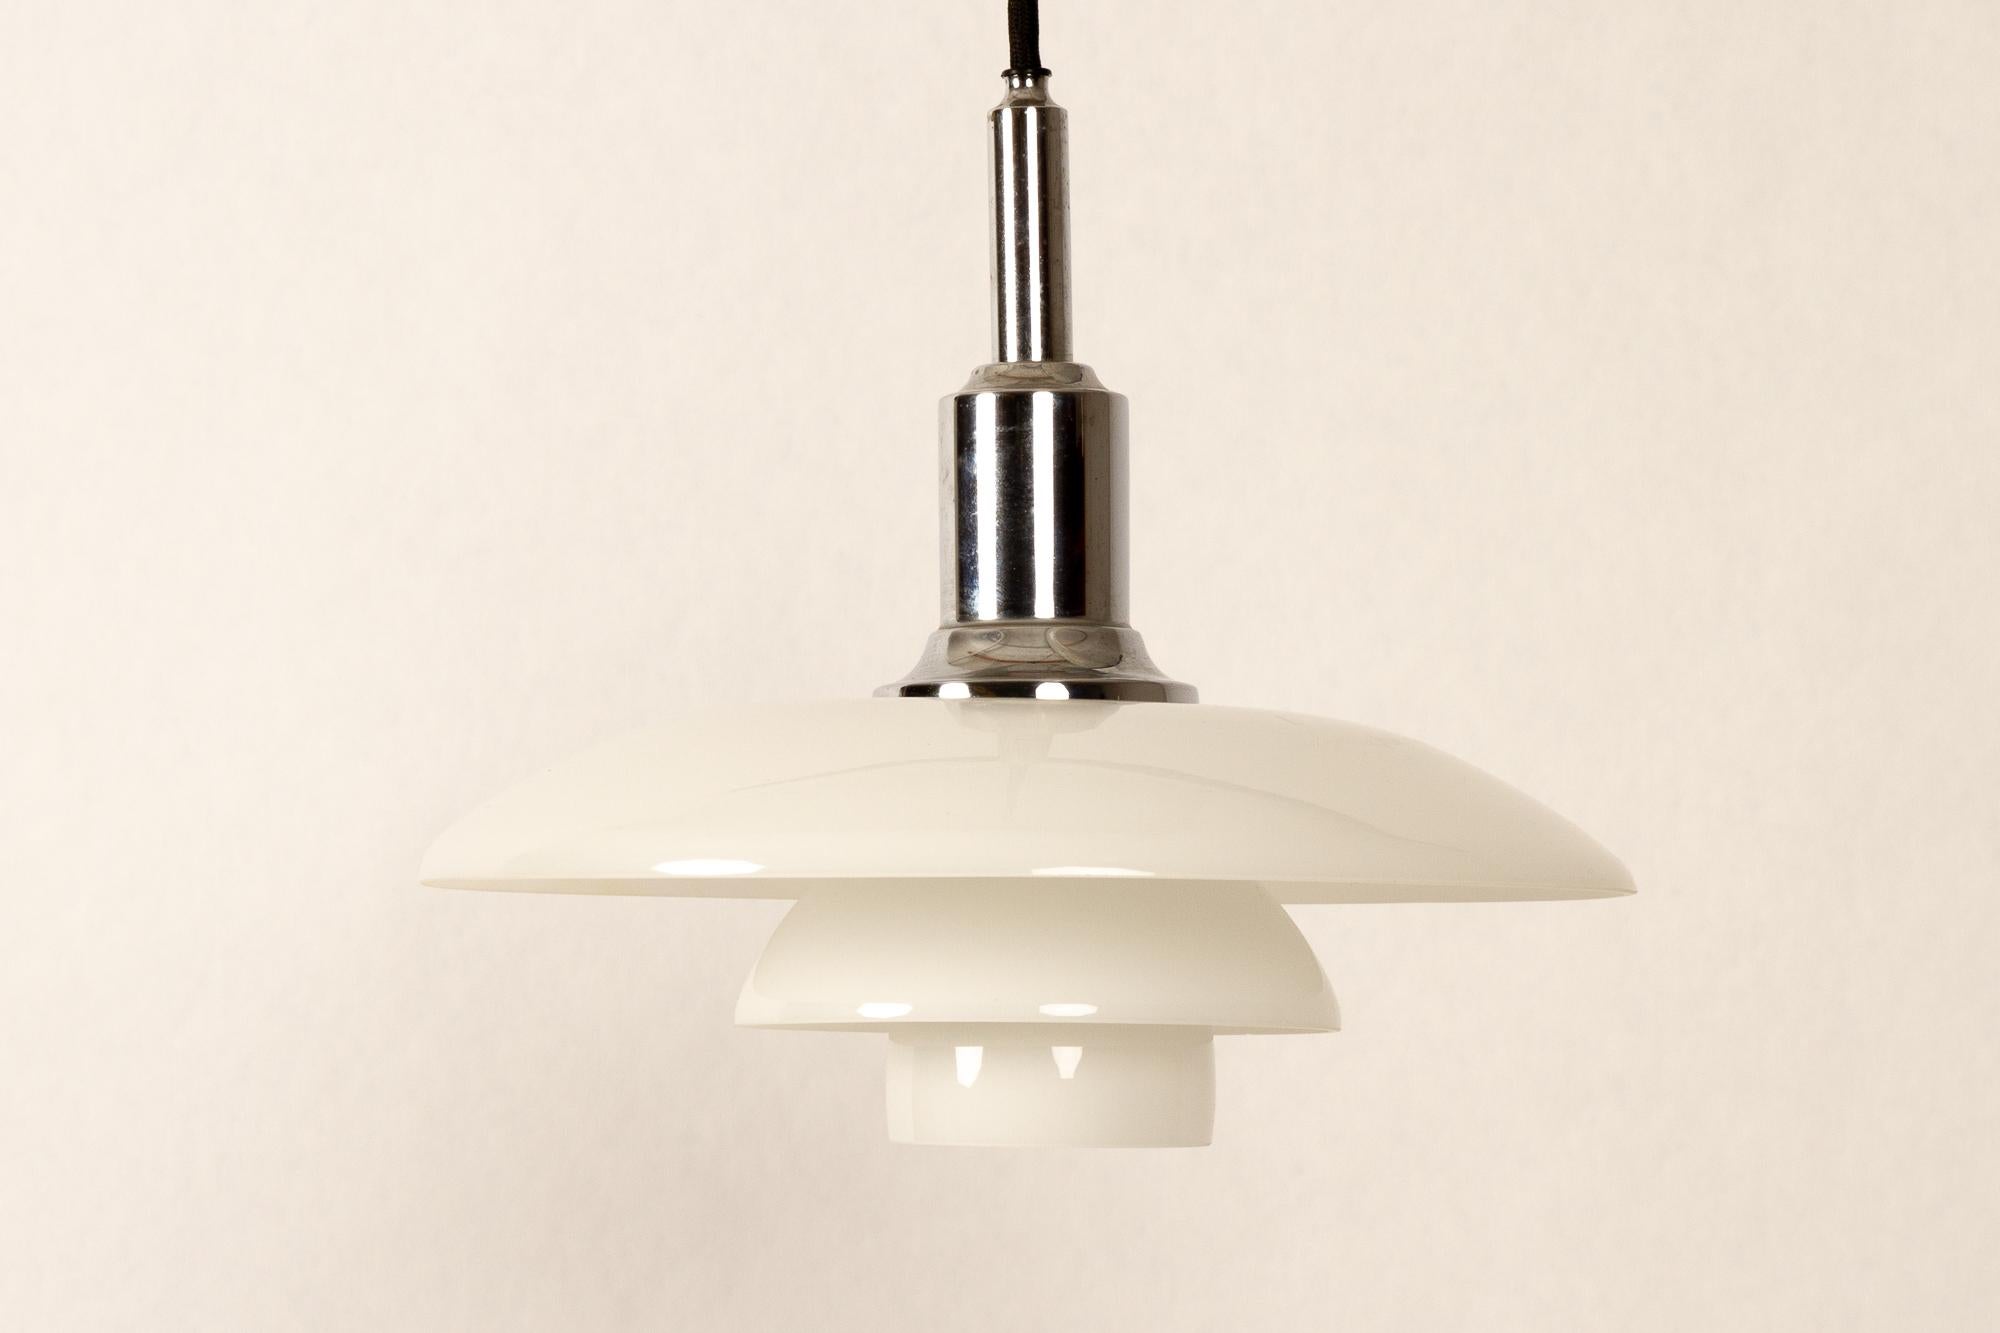 PH 3/2 pendant by Poul Henningsen for Louis Poulsen, 1990s.
Danish PH 3 / 2 pendant with three opaline glass shades, top in chrome-plated brass. Iconic lamps designed in the 1920s by Danish architect Poul Henningsen. All lamps are glare free, and